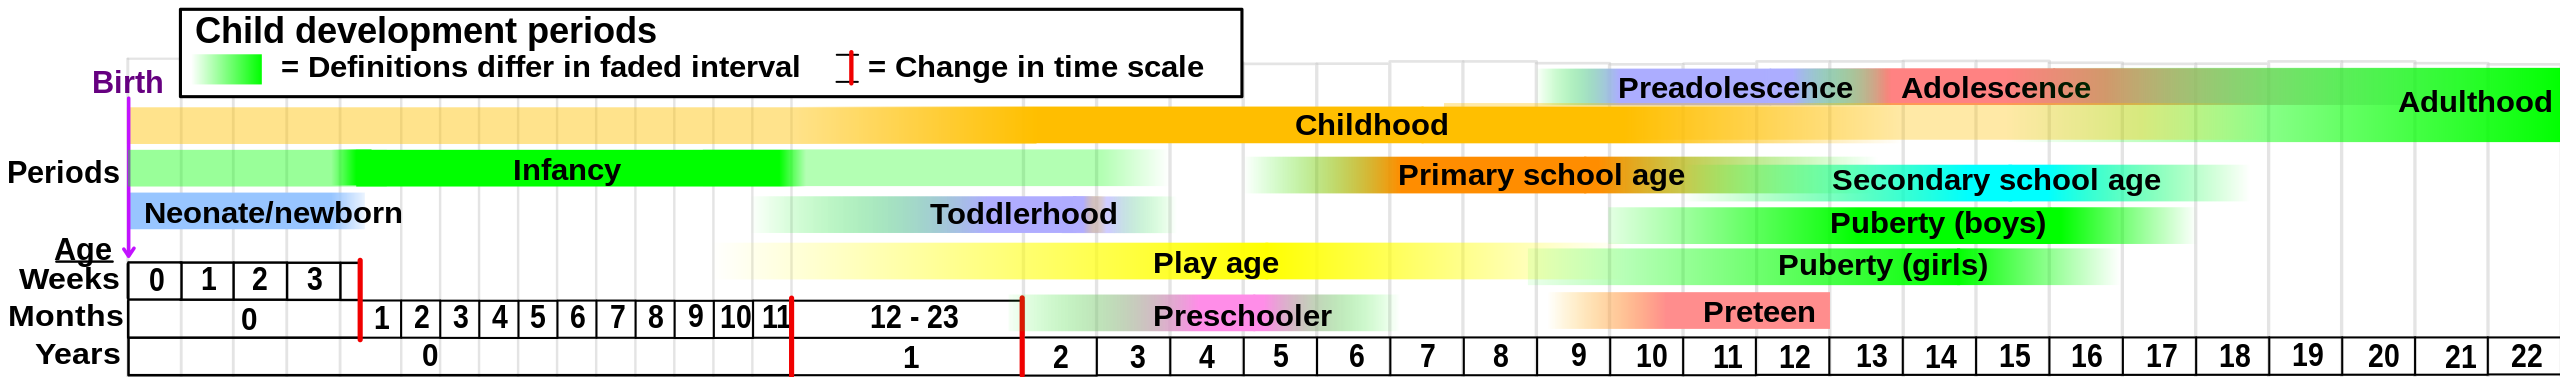 2560px-Child_development_stages.svg.png